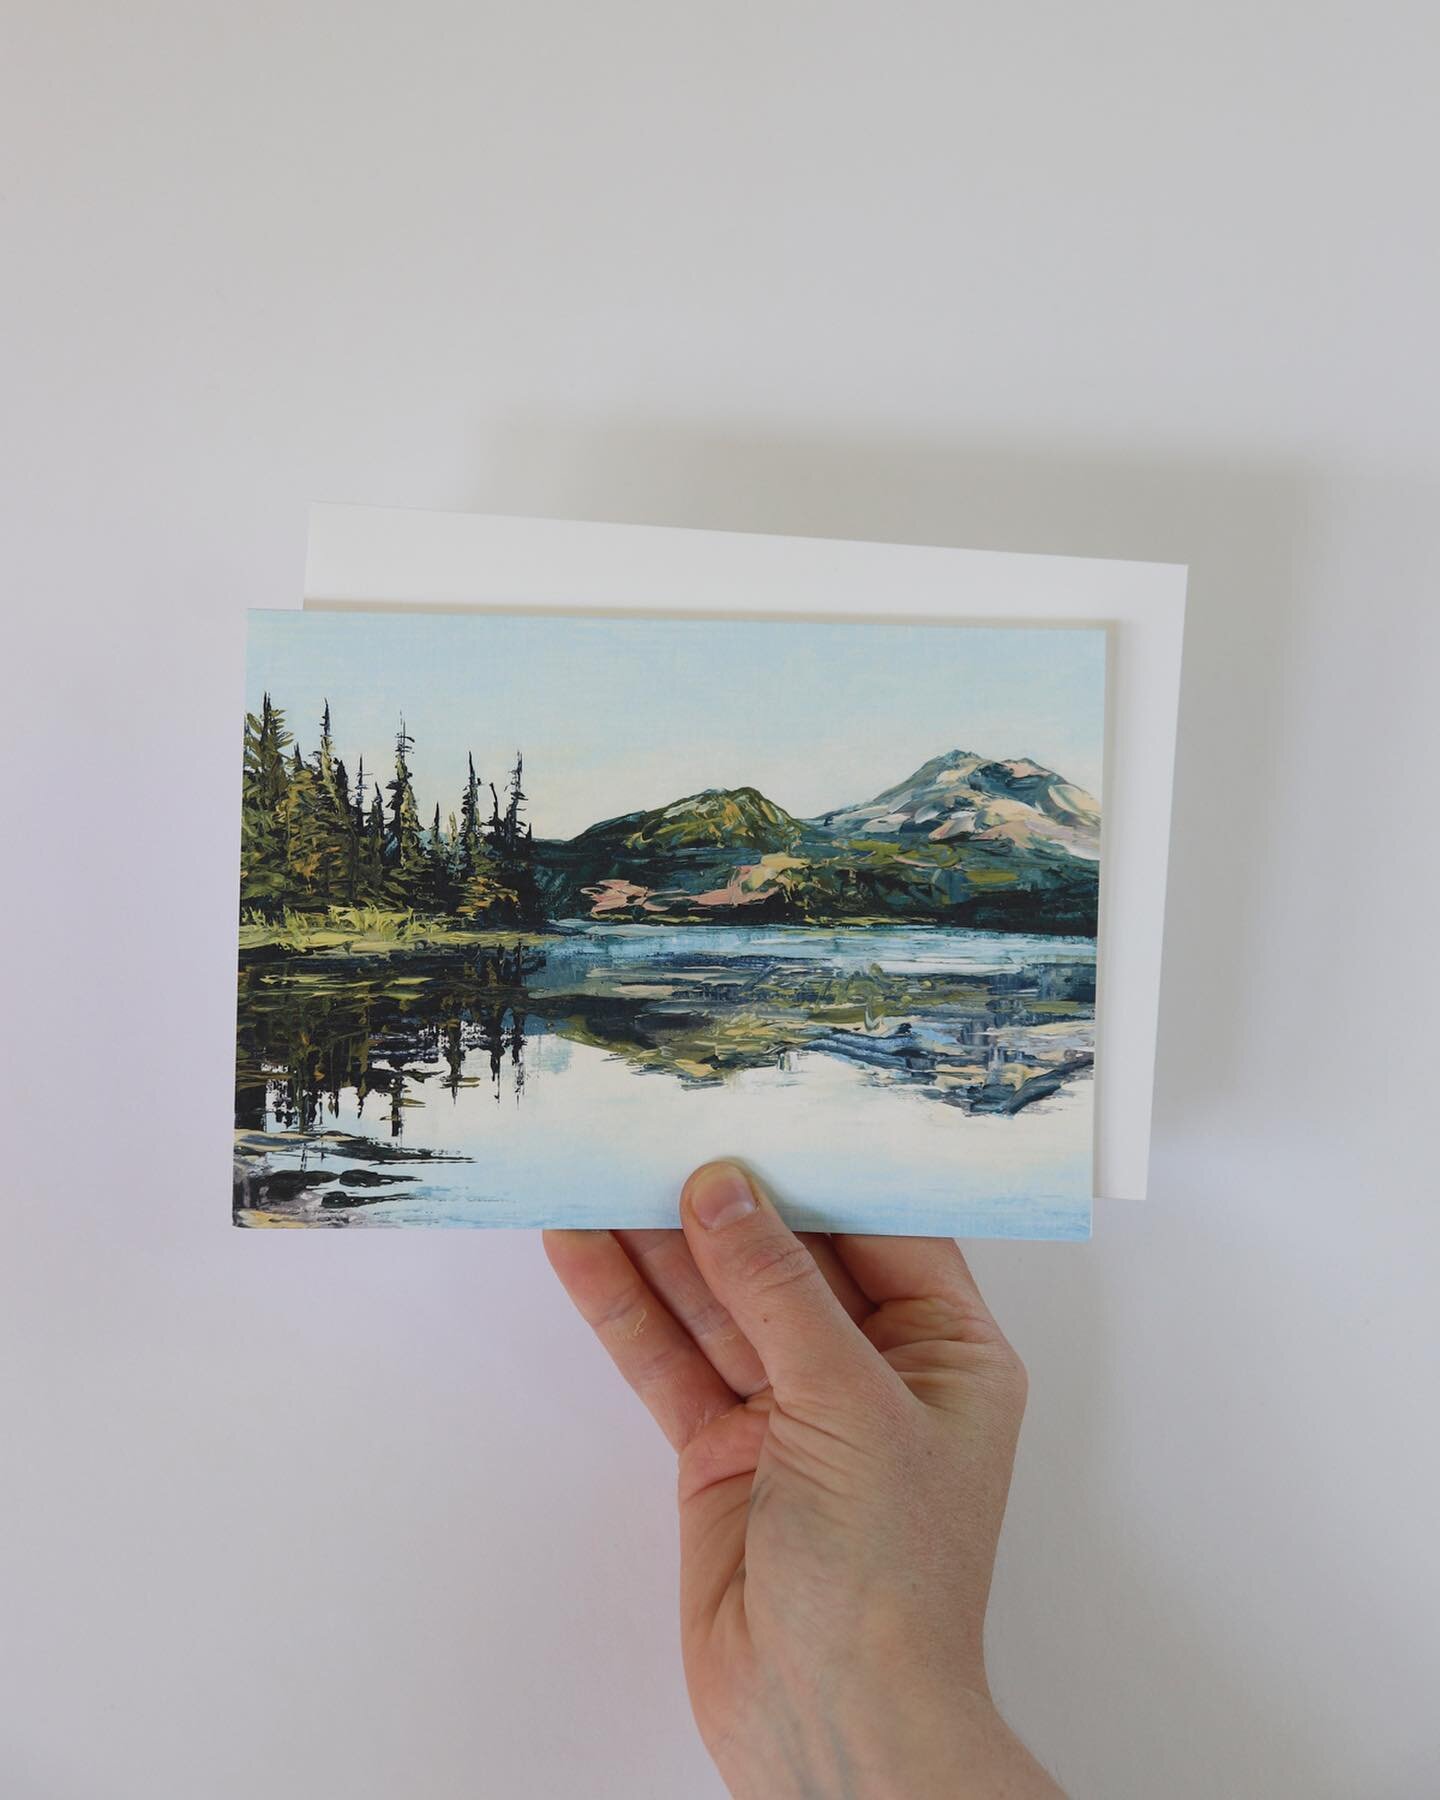 🌲Oregon Card Packs🌲

They&rsquo;re back and better than ever!
(6) 5x7 cards featuring different Oregon landscapes!

Www.taylormanoles.com/cards

#art #artcards #cards #greetingcards #print #landscape #painting #landscapeart #landscapepainting #oreg